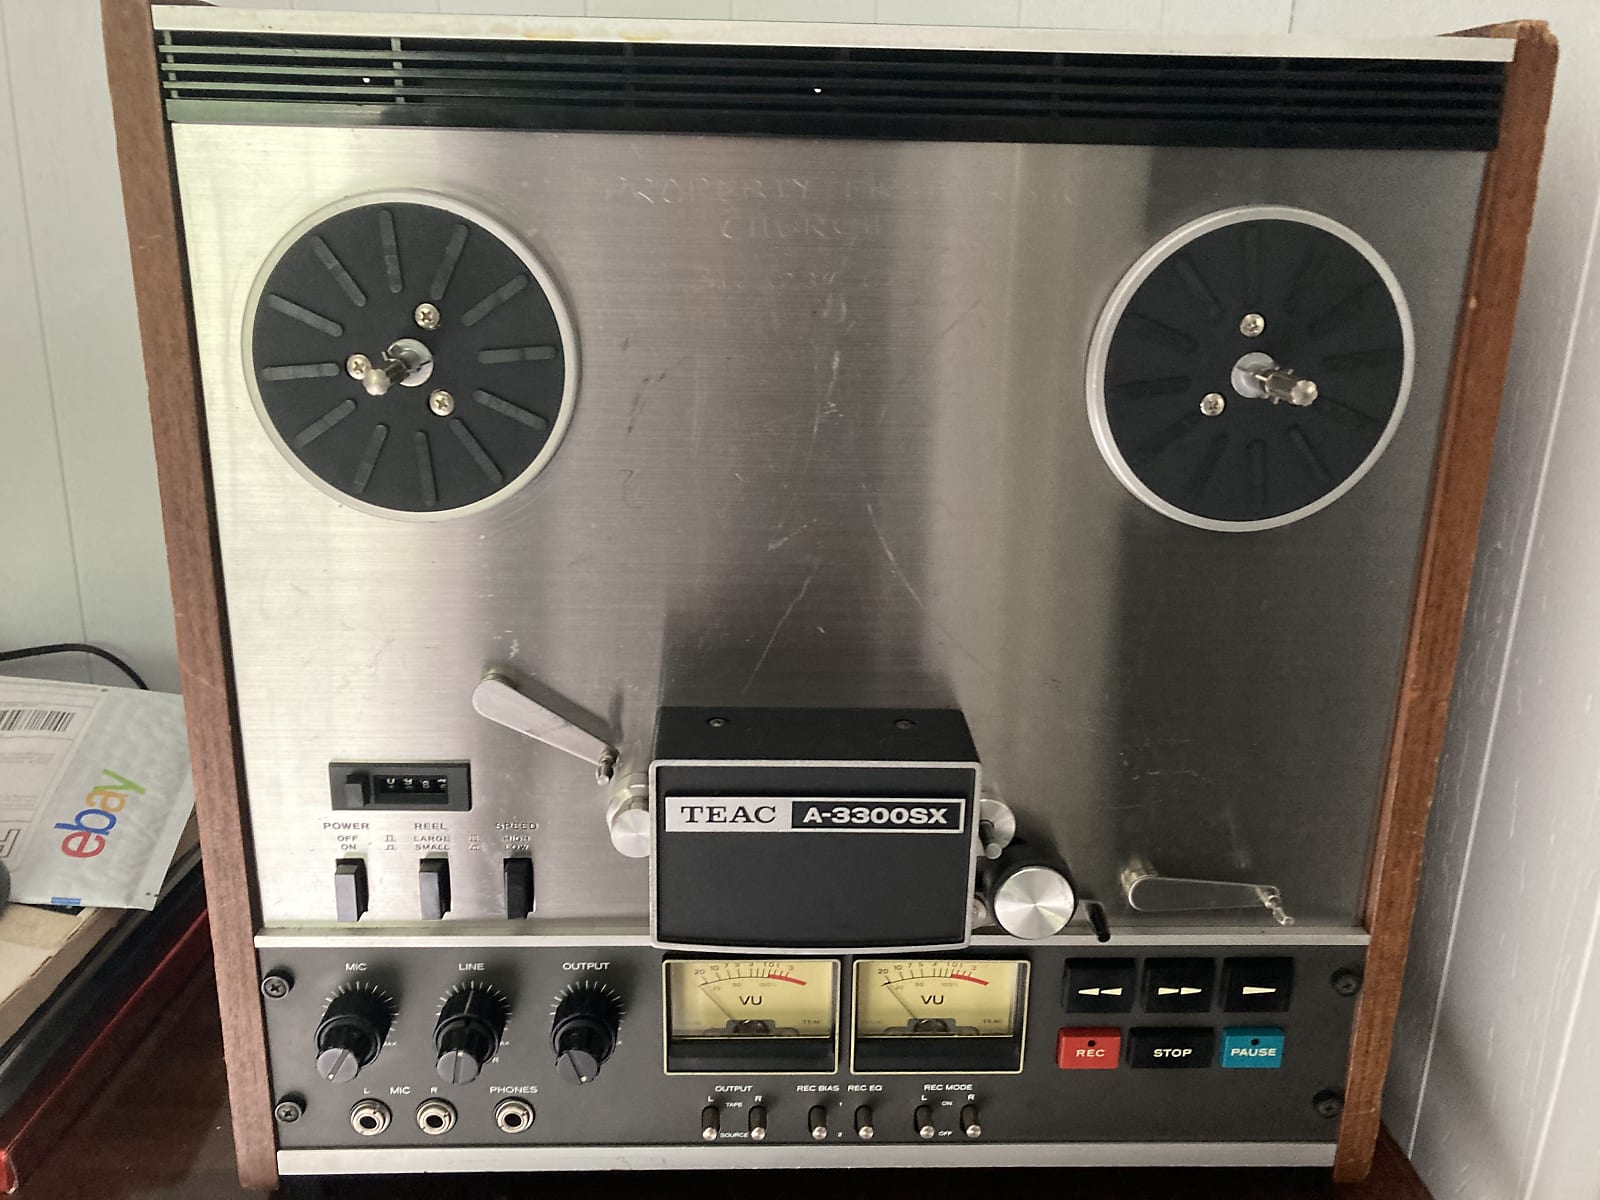 TEAC A-3300Sx 1/4 2-Track Reel to Reel Tape Recorder | Reverb